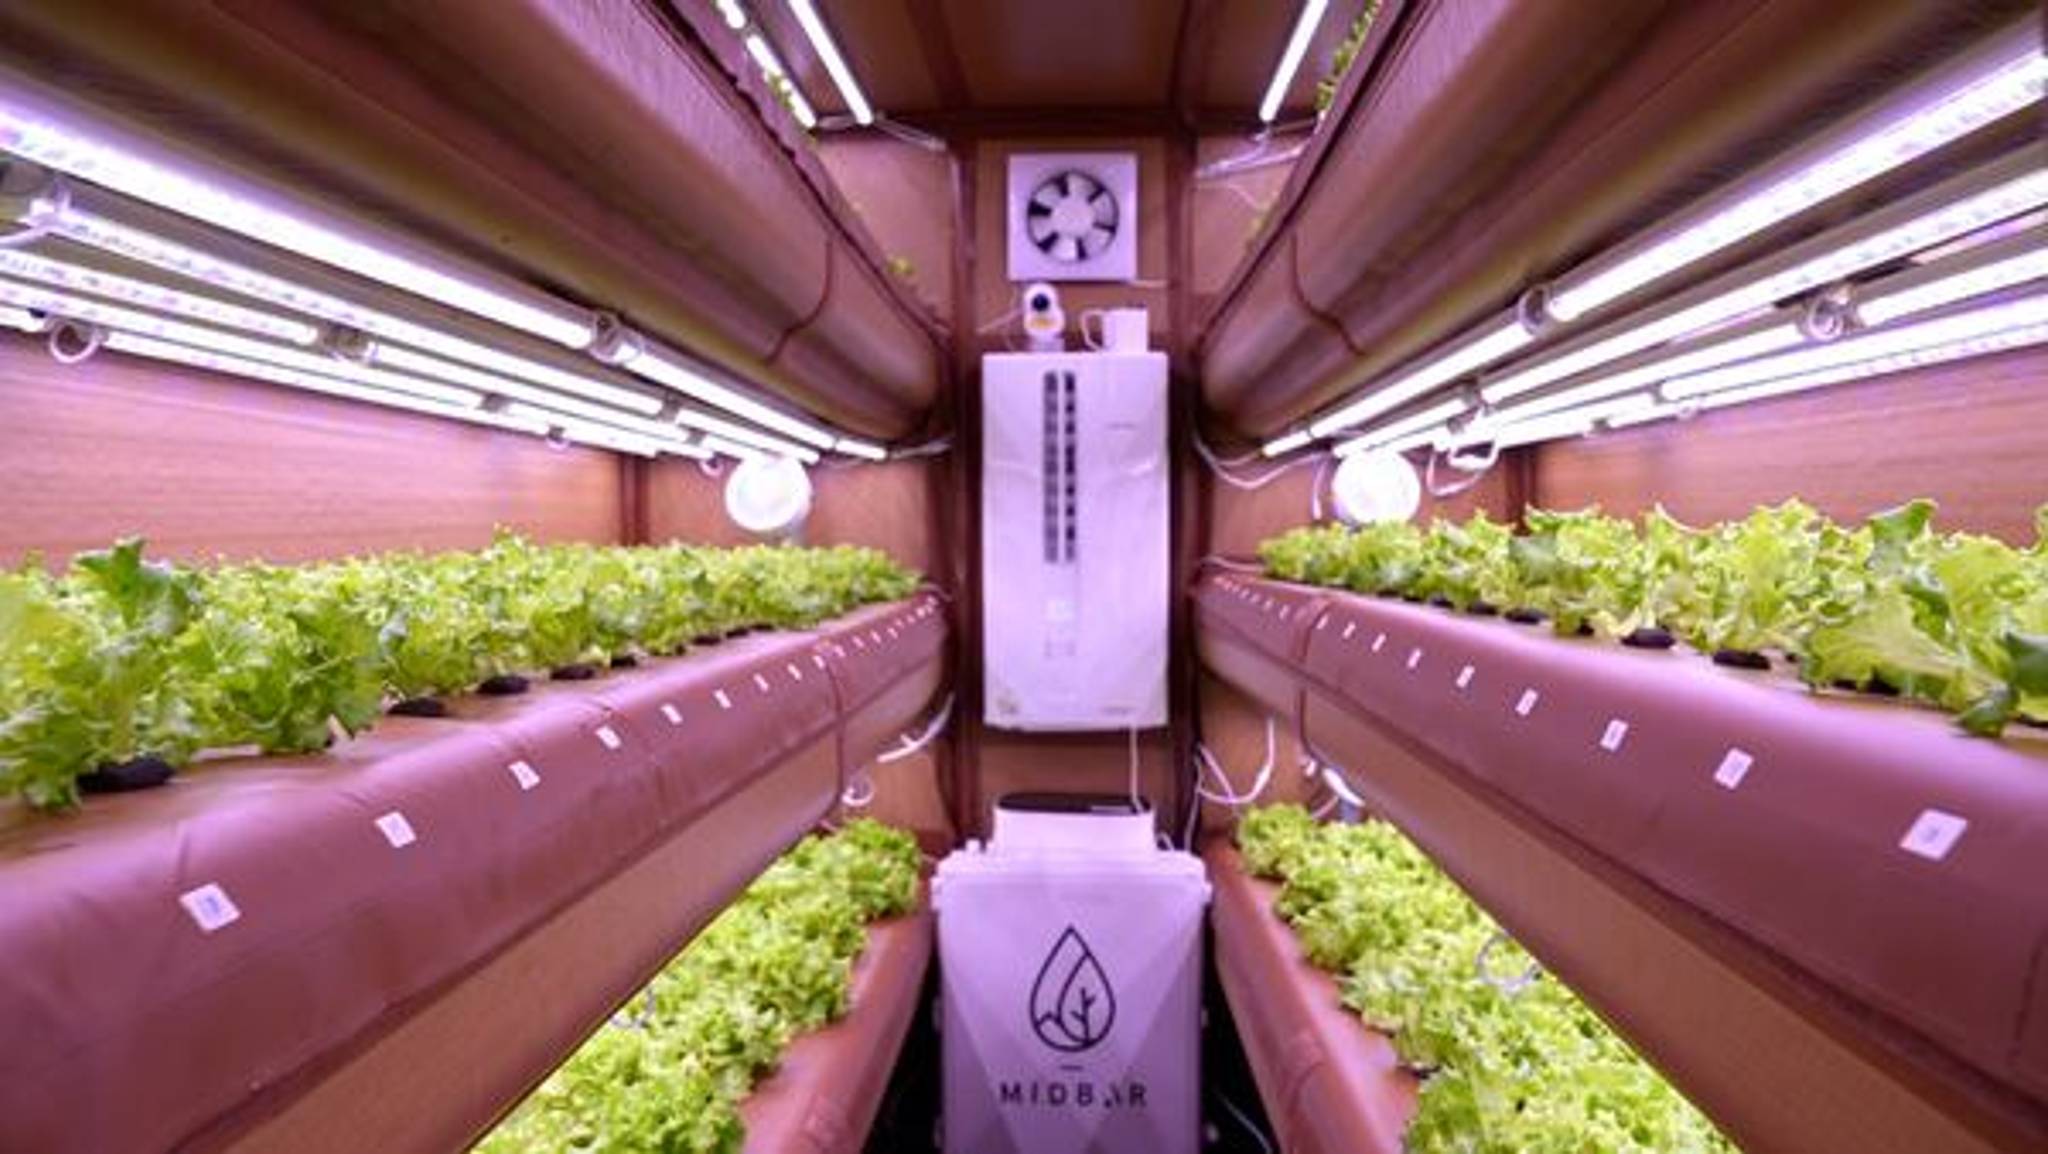 AirFarm offers sustainable aeroponic farming solutions